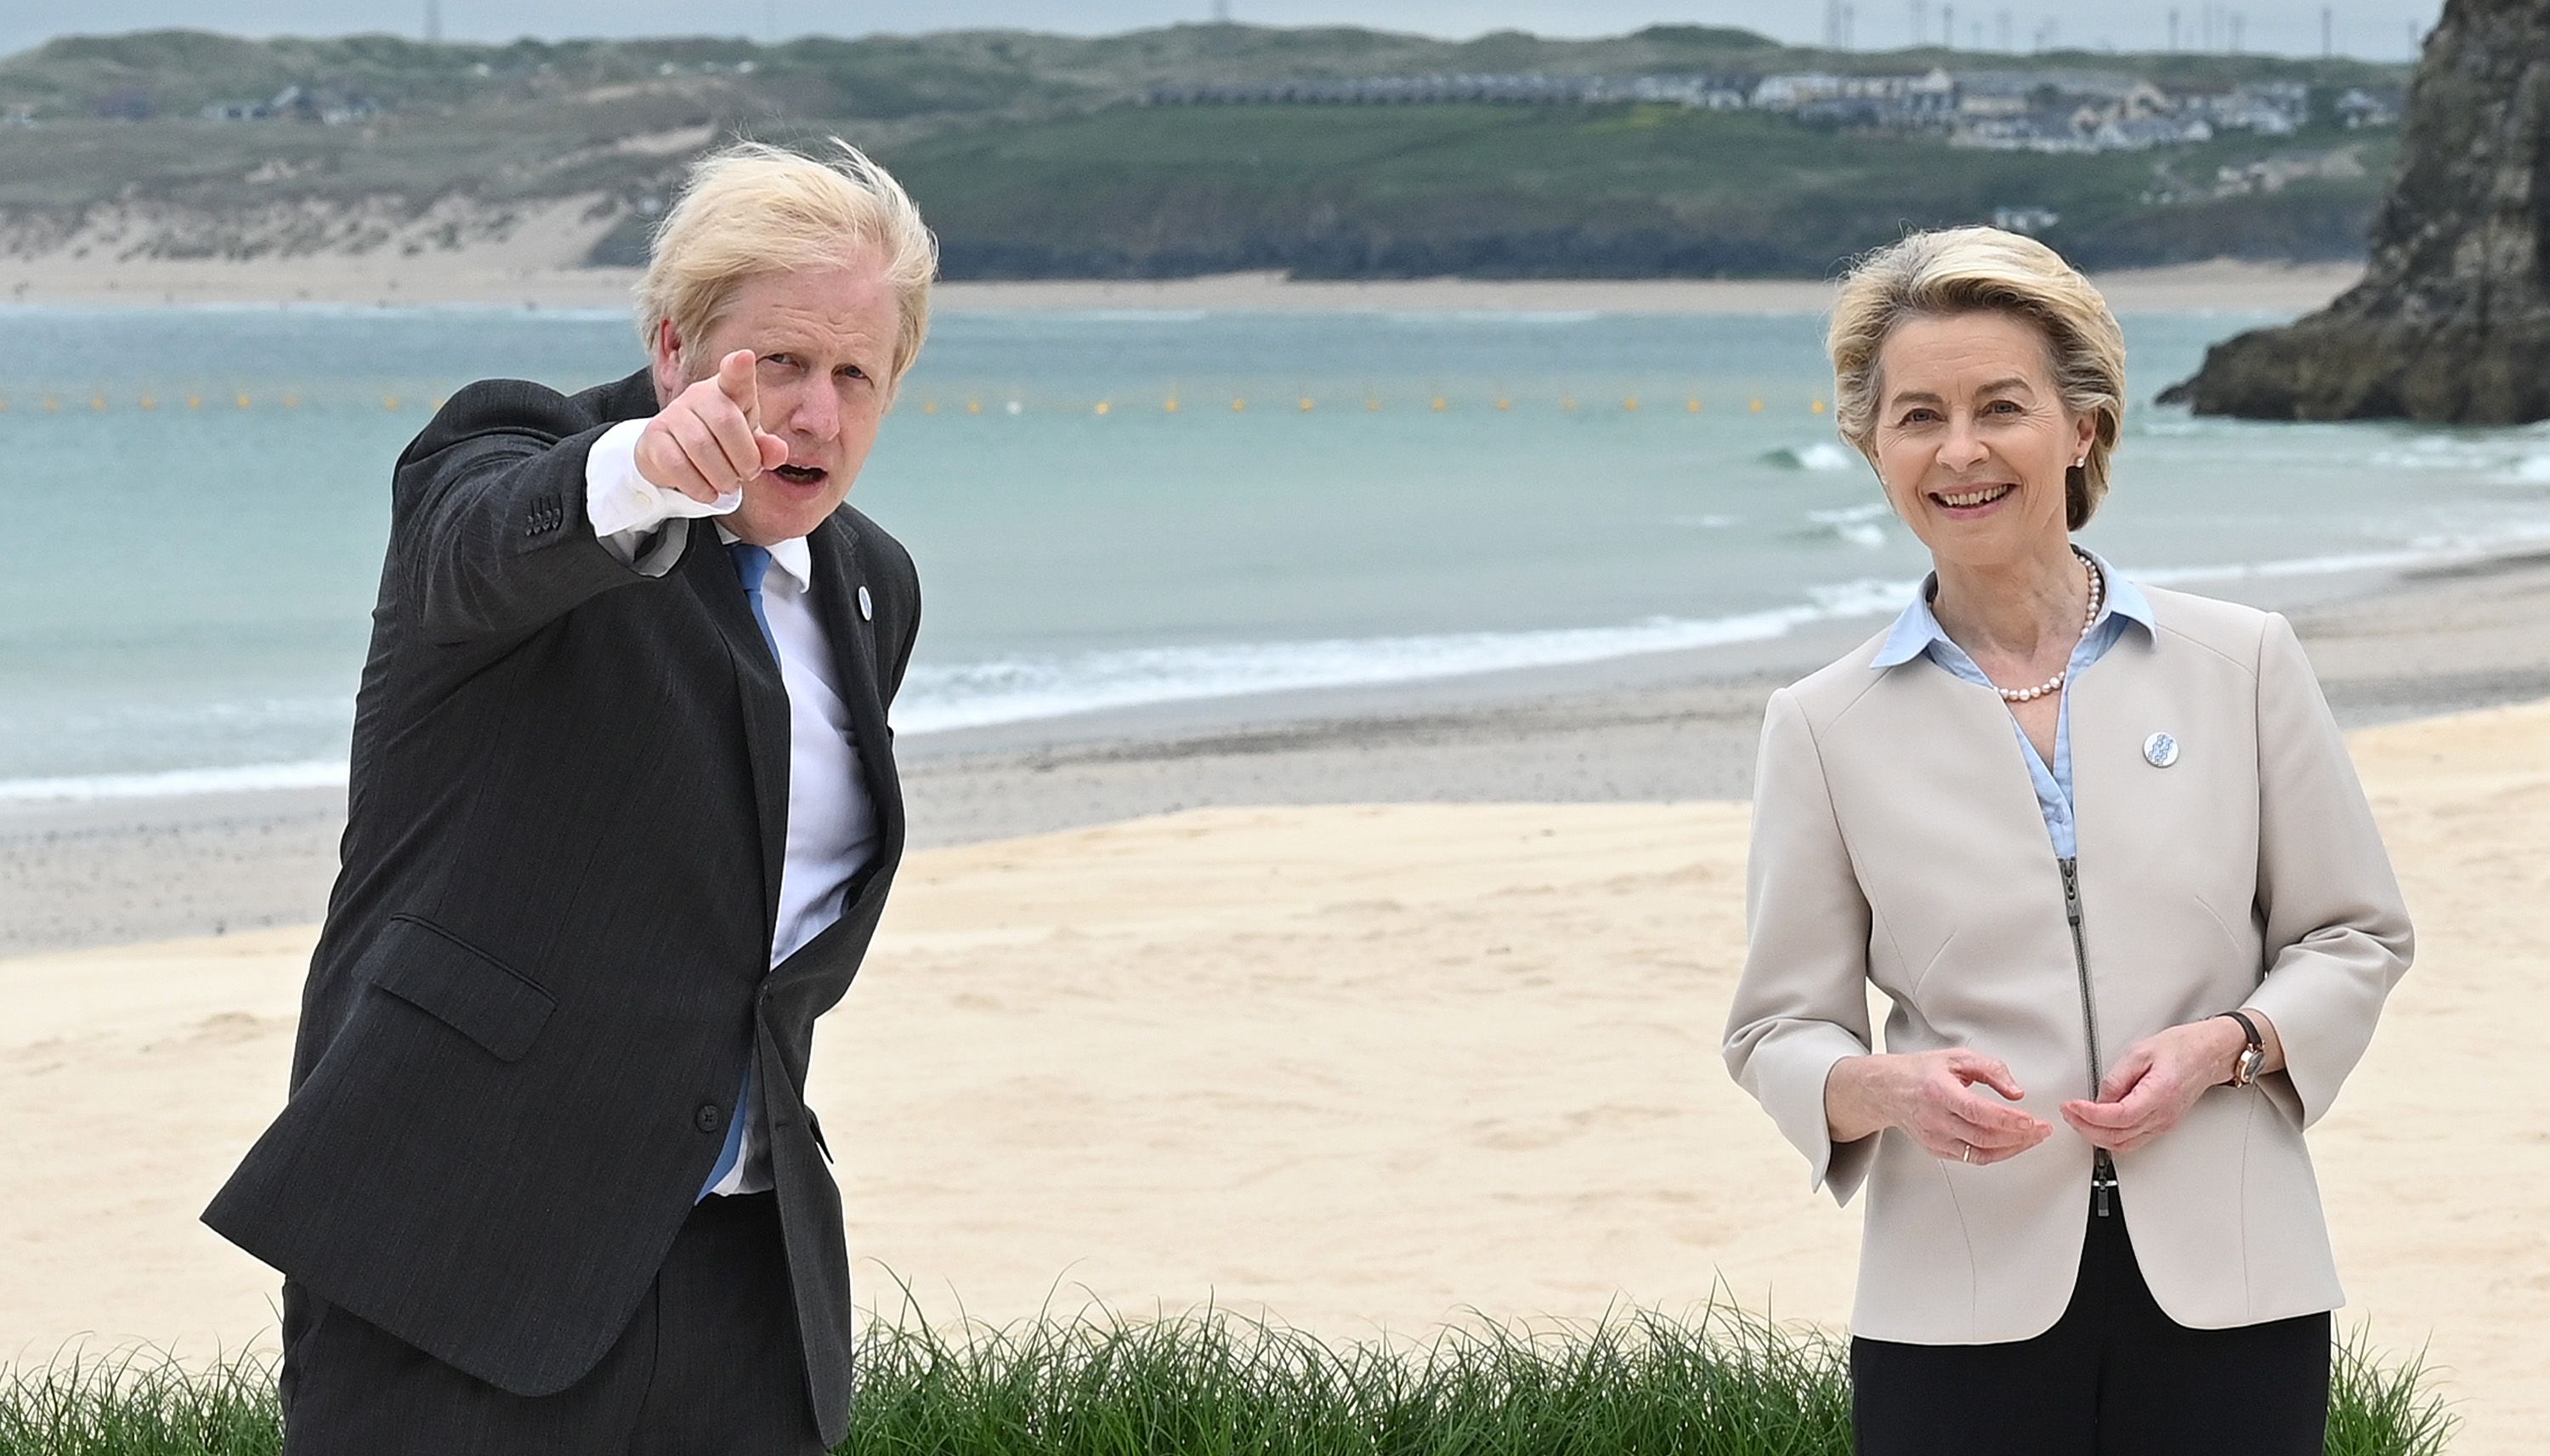 Prime Minister Boris Johnson with President of the European Commission Ursula von der Leyen during the Leaders official welcome during the G7 Summit in Cornwall.